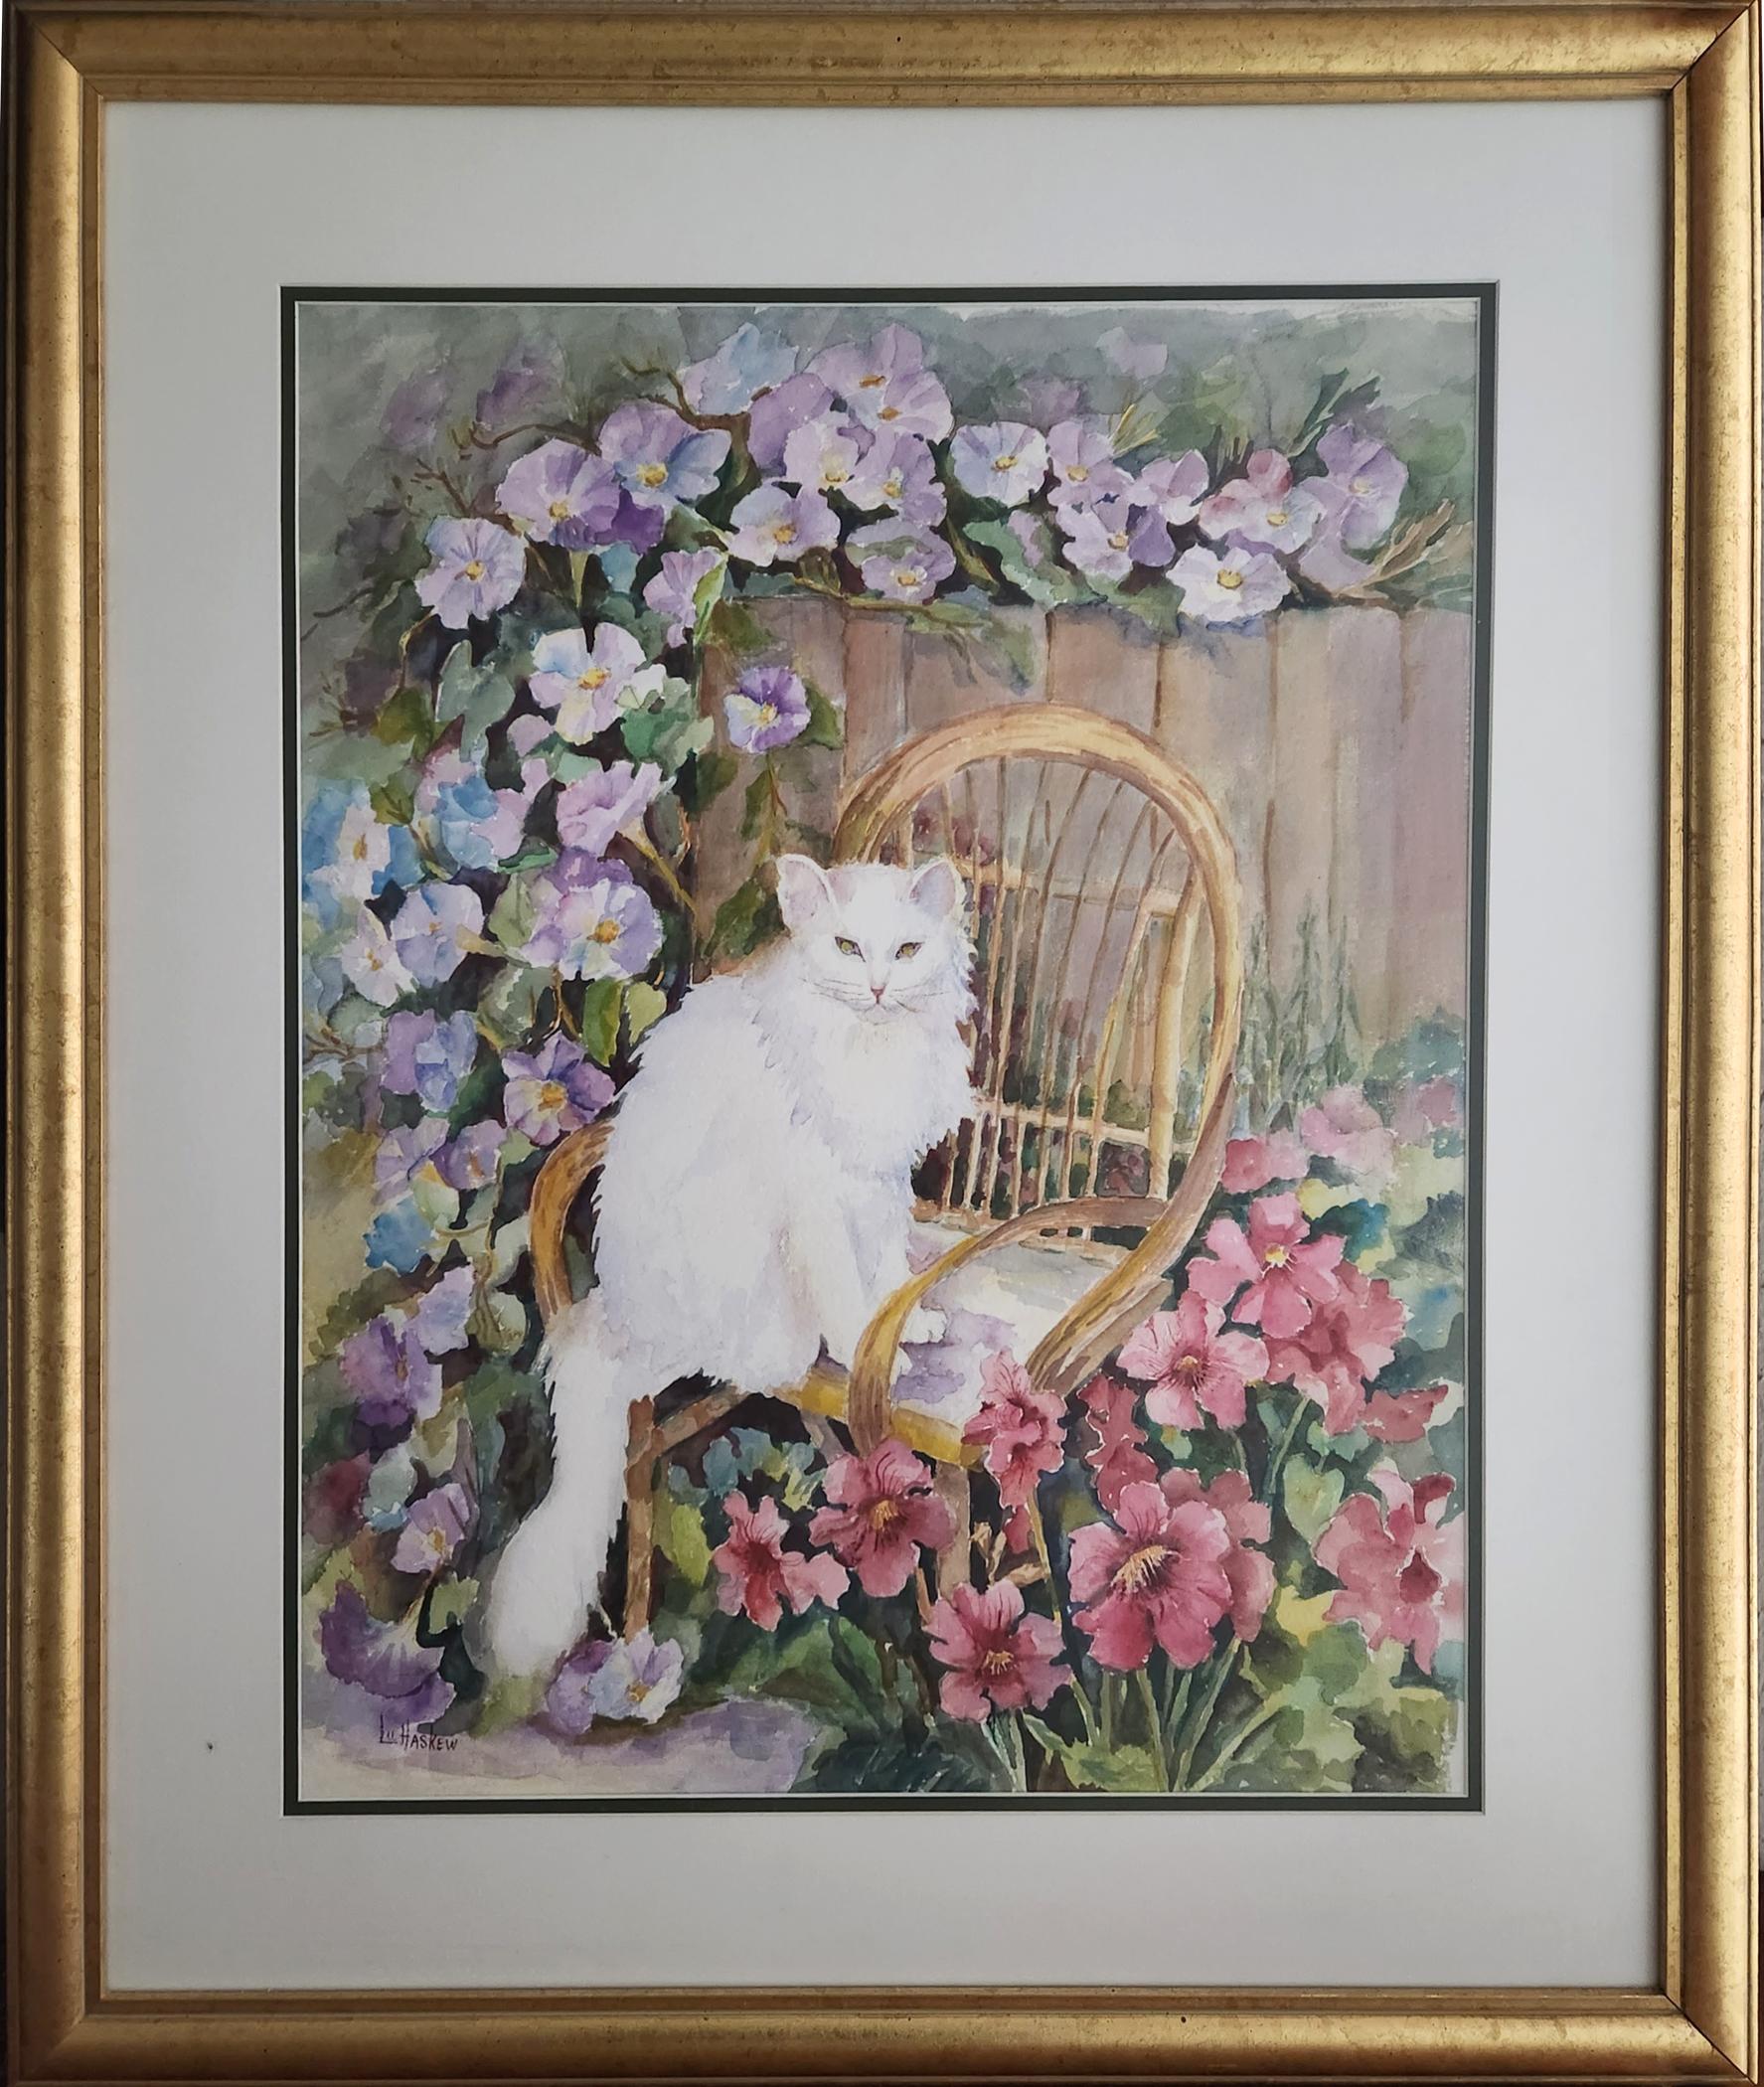 White Cat & Morning Glories, 23x18" watercolor